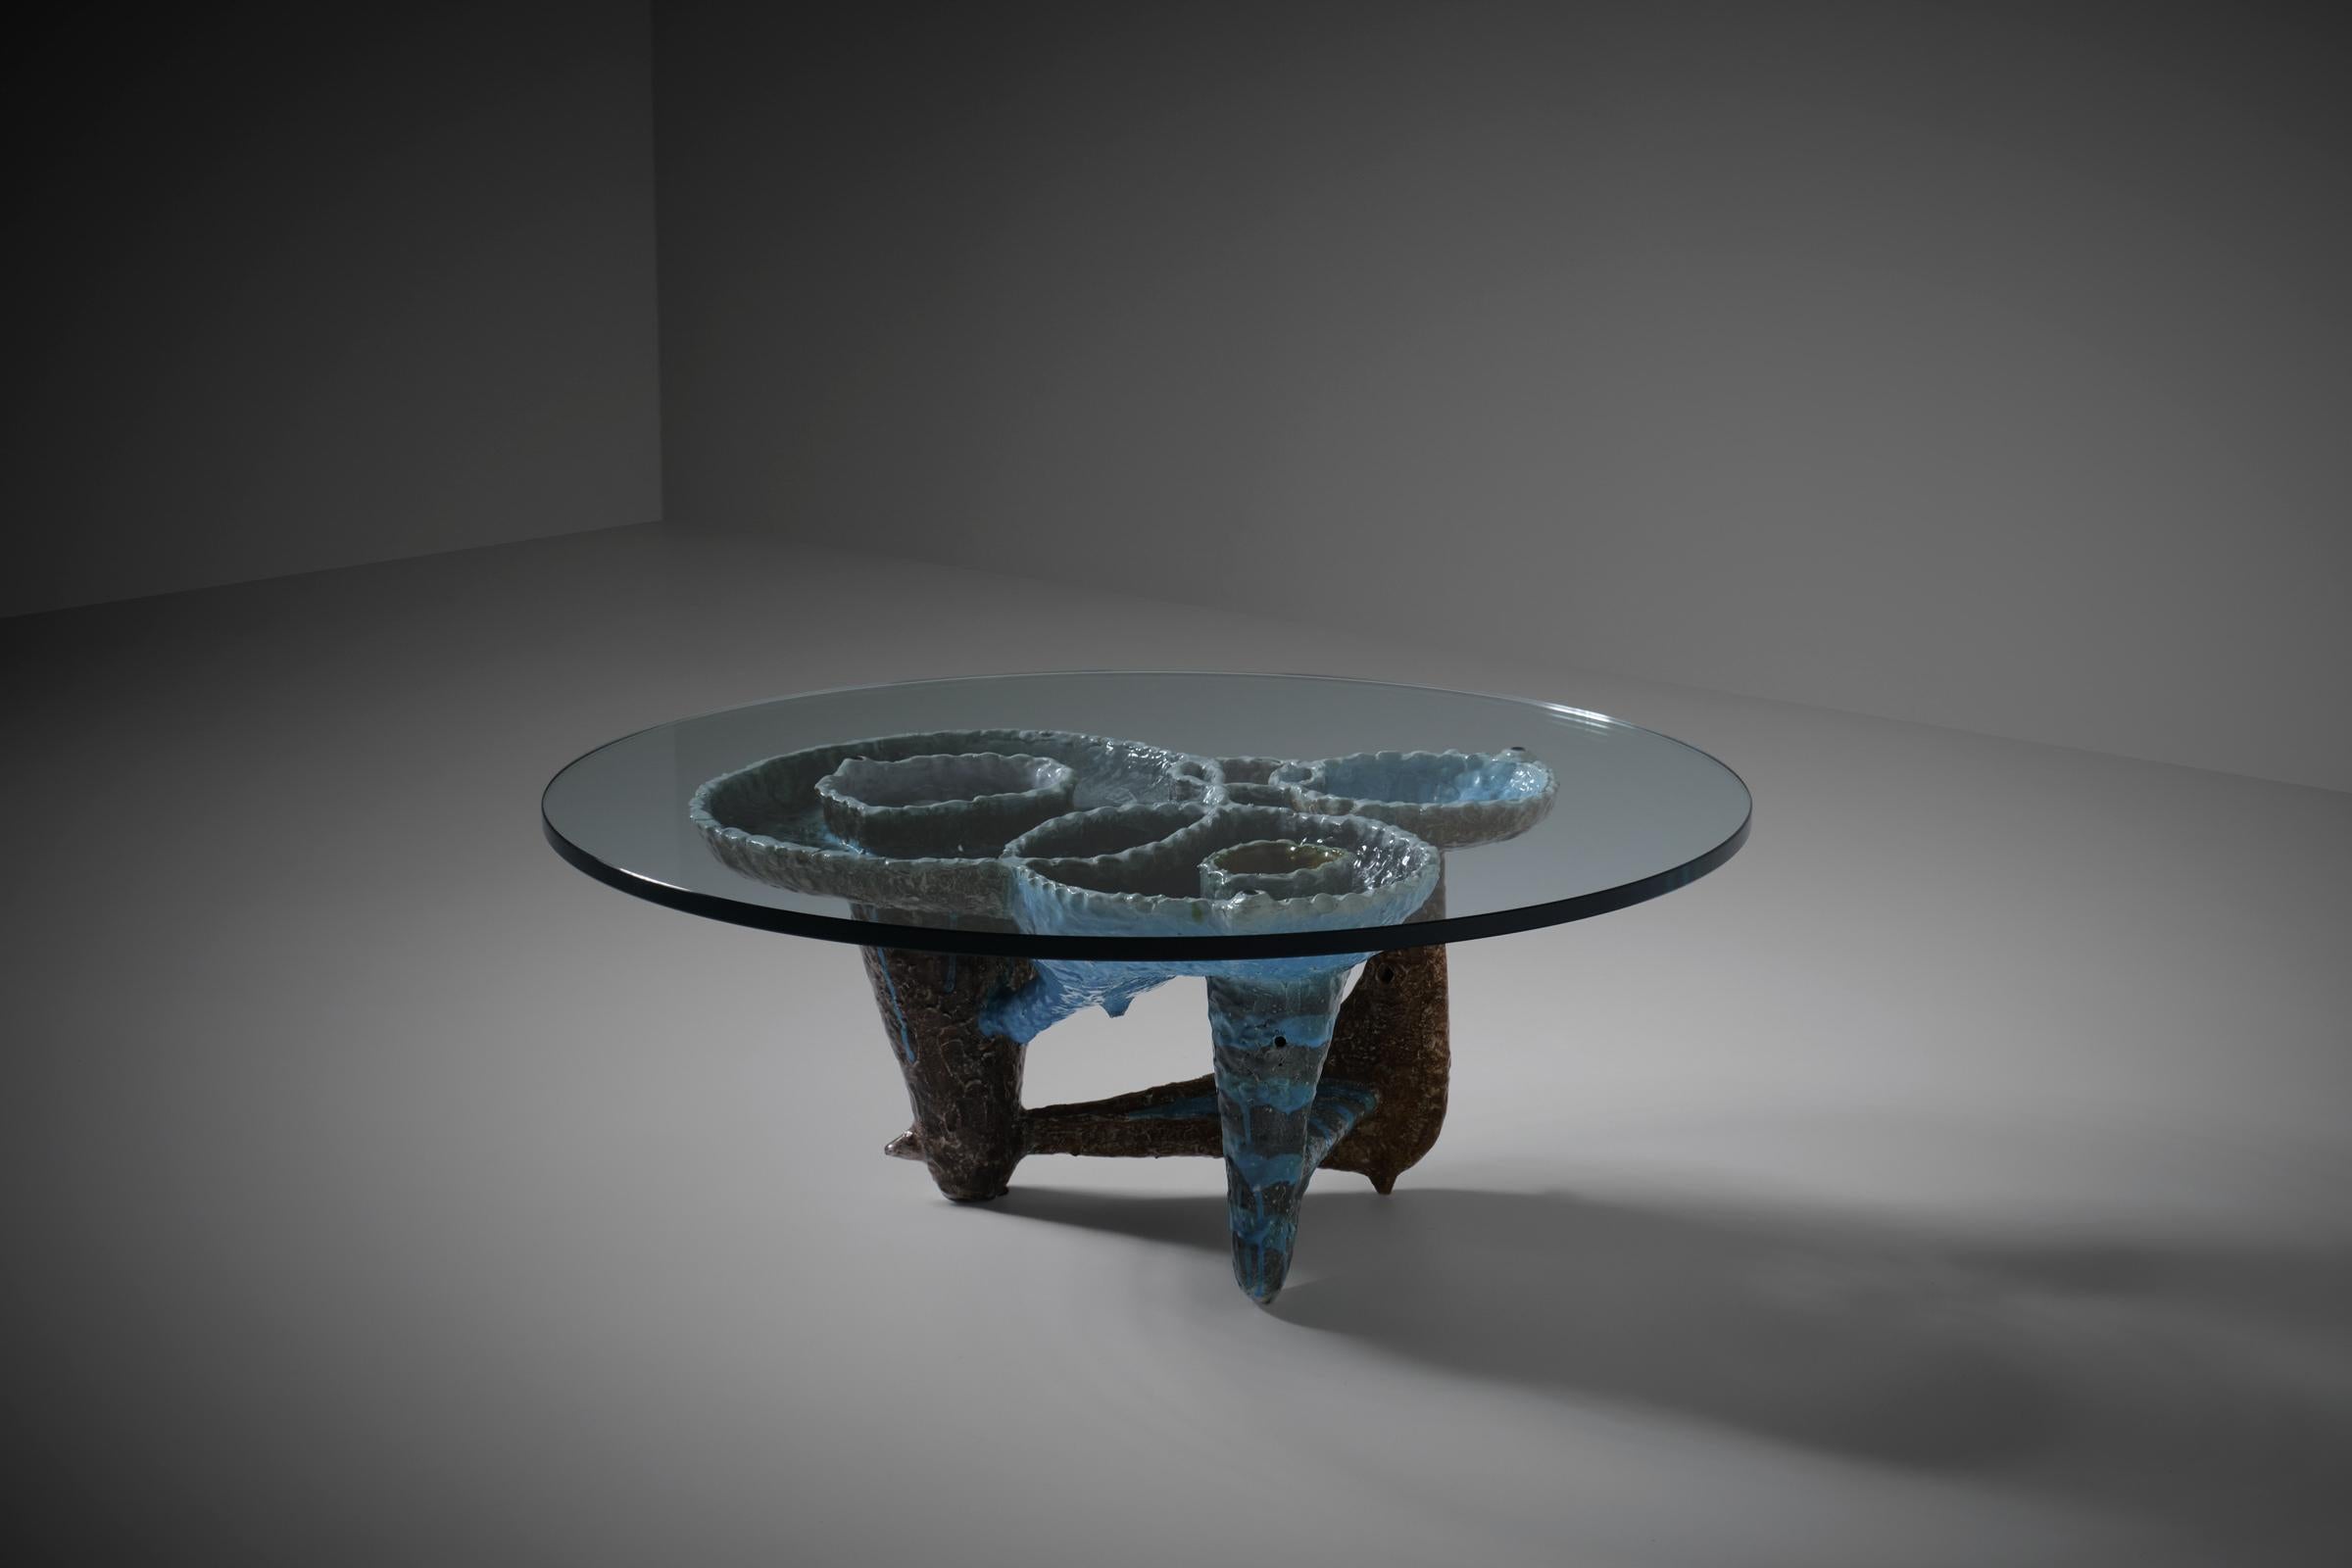 Ceramic coffee table by Rolando Hettner (1905 - 1978), Italy 1950s. Hettner was born in Florence coming from a family of renowned artists. His father, Otto Hettner, was one of the first impressionist painters in Germany. Hettner attended the